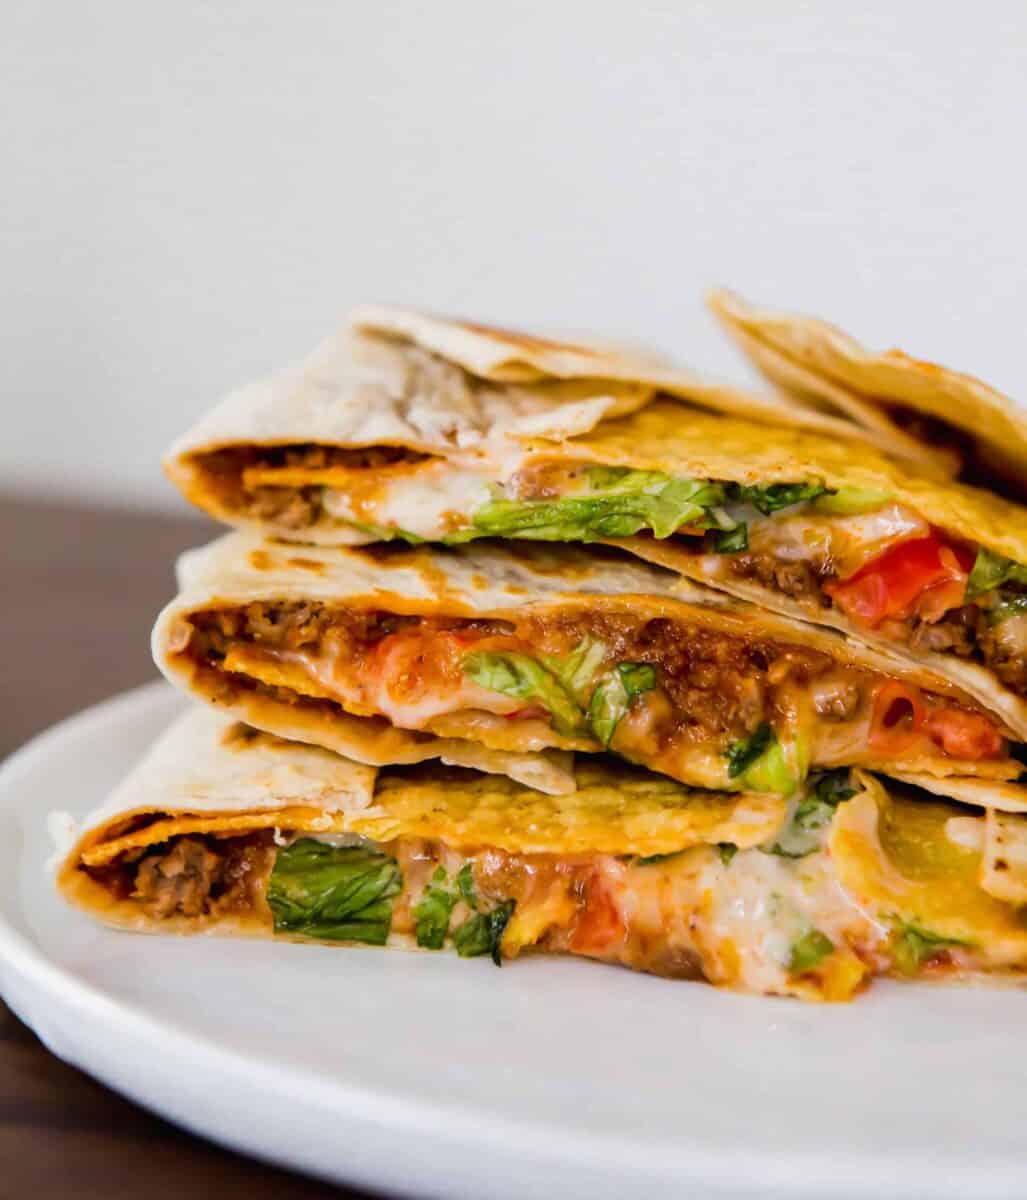 This homemade Crunchwrap Supreme recipe is going to satisfy all your Taco Bell cravings! It's filled with meaty, cheesy, crunchy goodness!